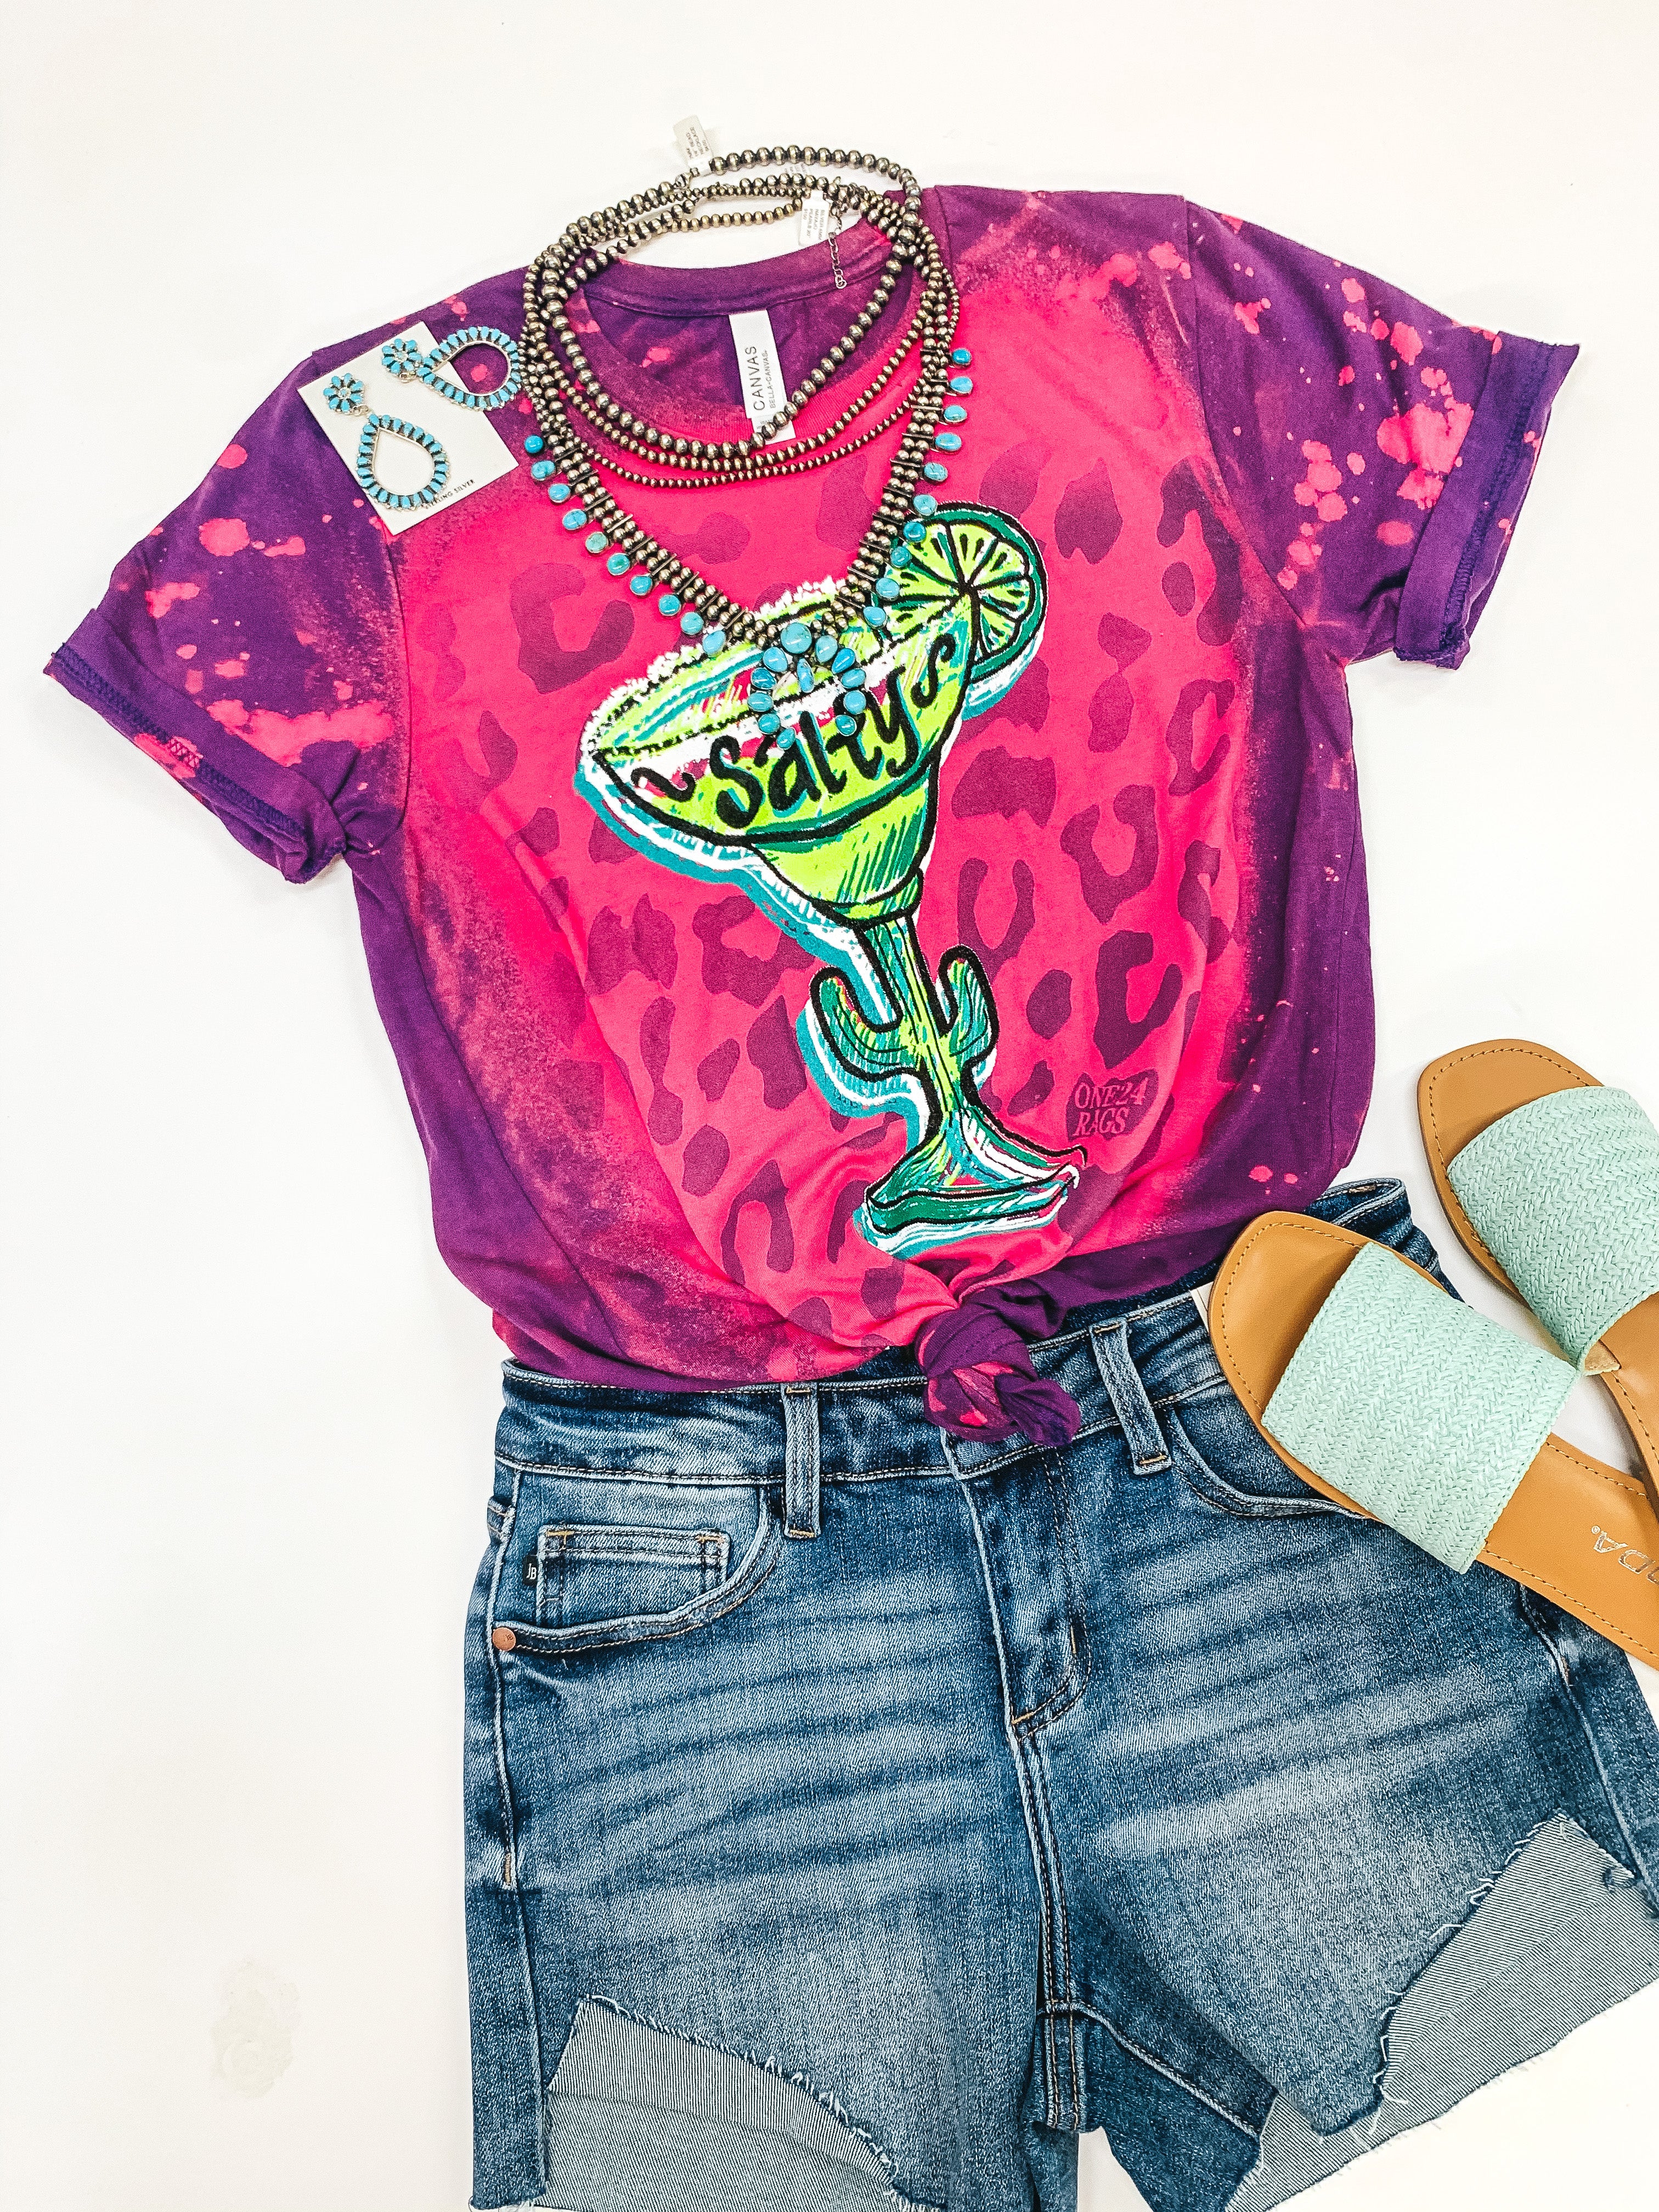 Salty Vintage Leopard Margarita Short Sleeve Graphic Tee with Bleach Distressing in Magenta - Giddy Up Glamour Boutique